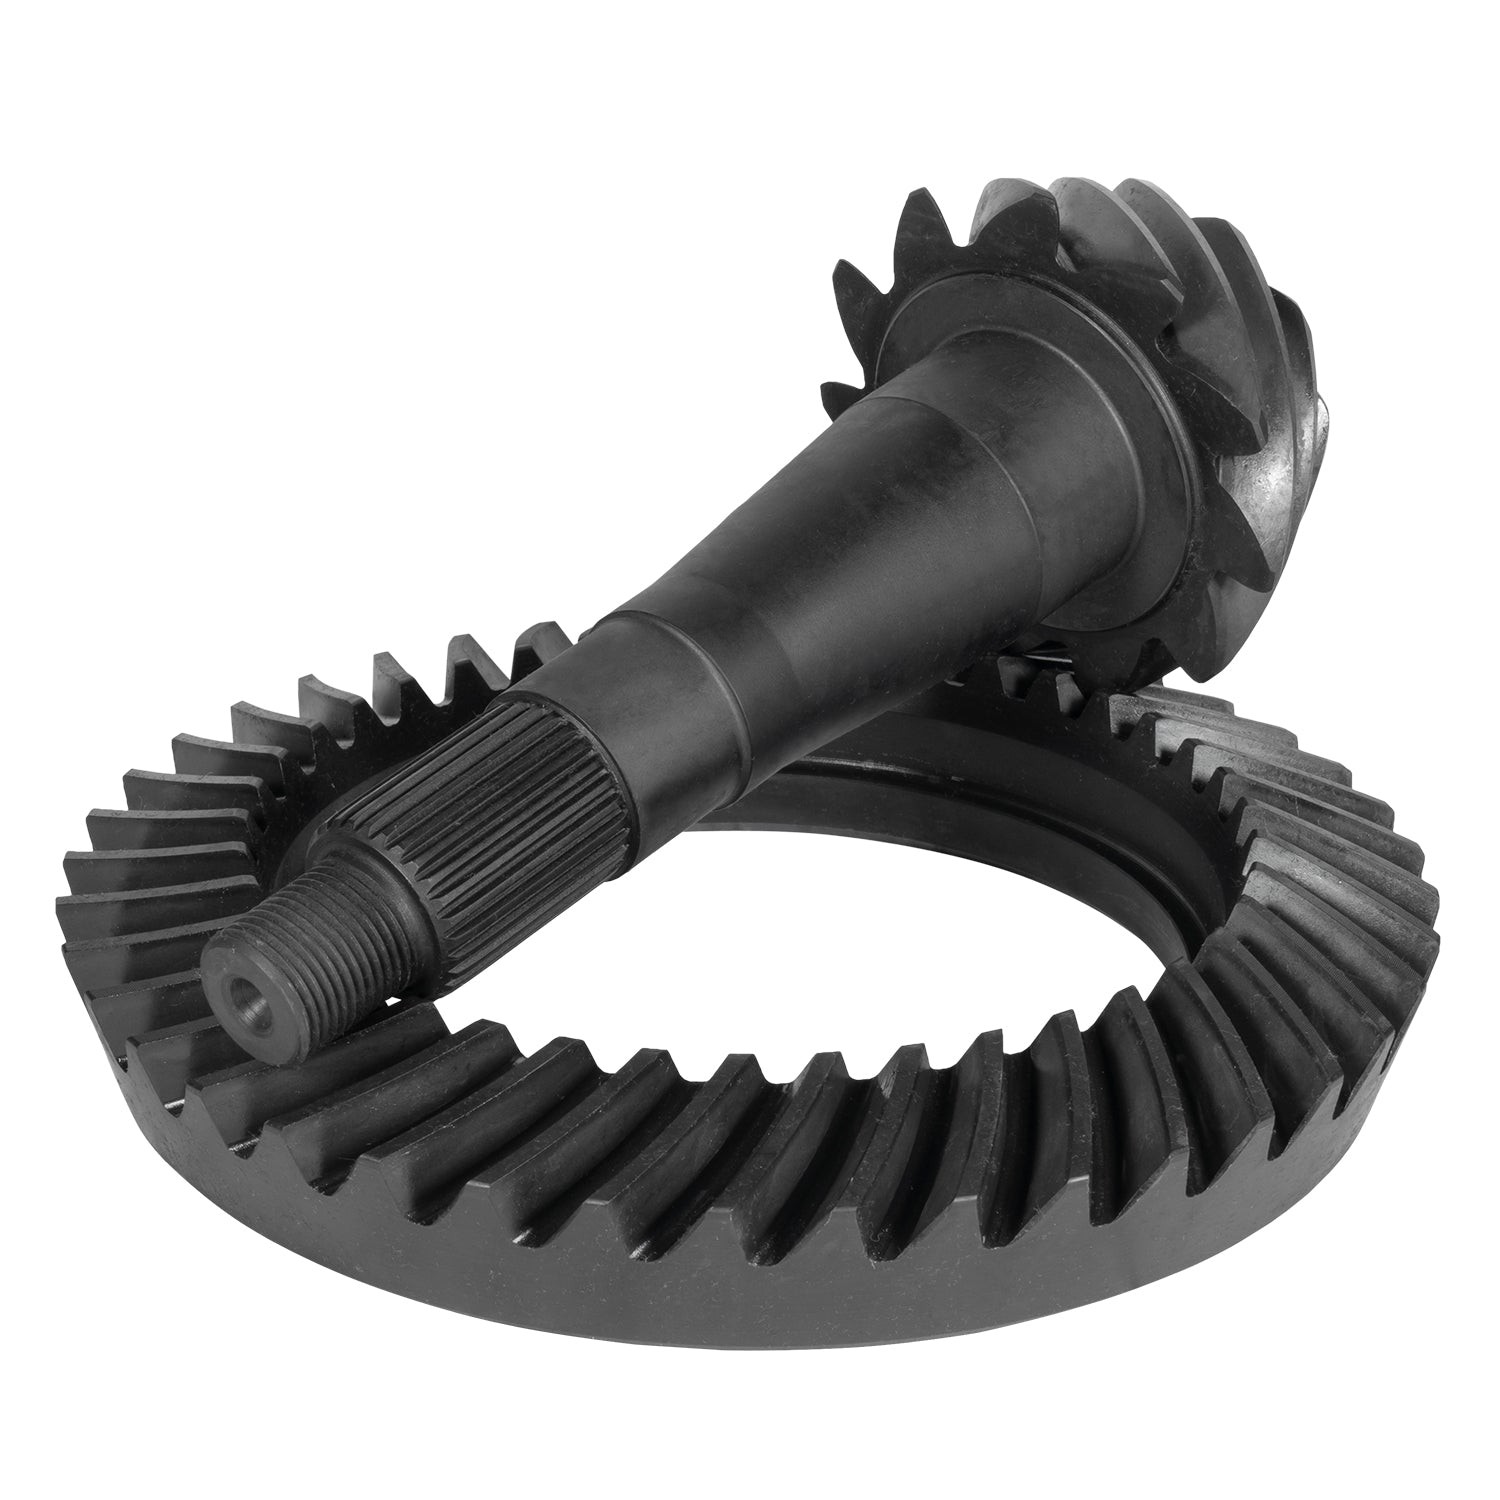 Yukon Gear Chrysler Dodge Plymouth Differential Ring and Pinion Kit - Rear YGK2384